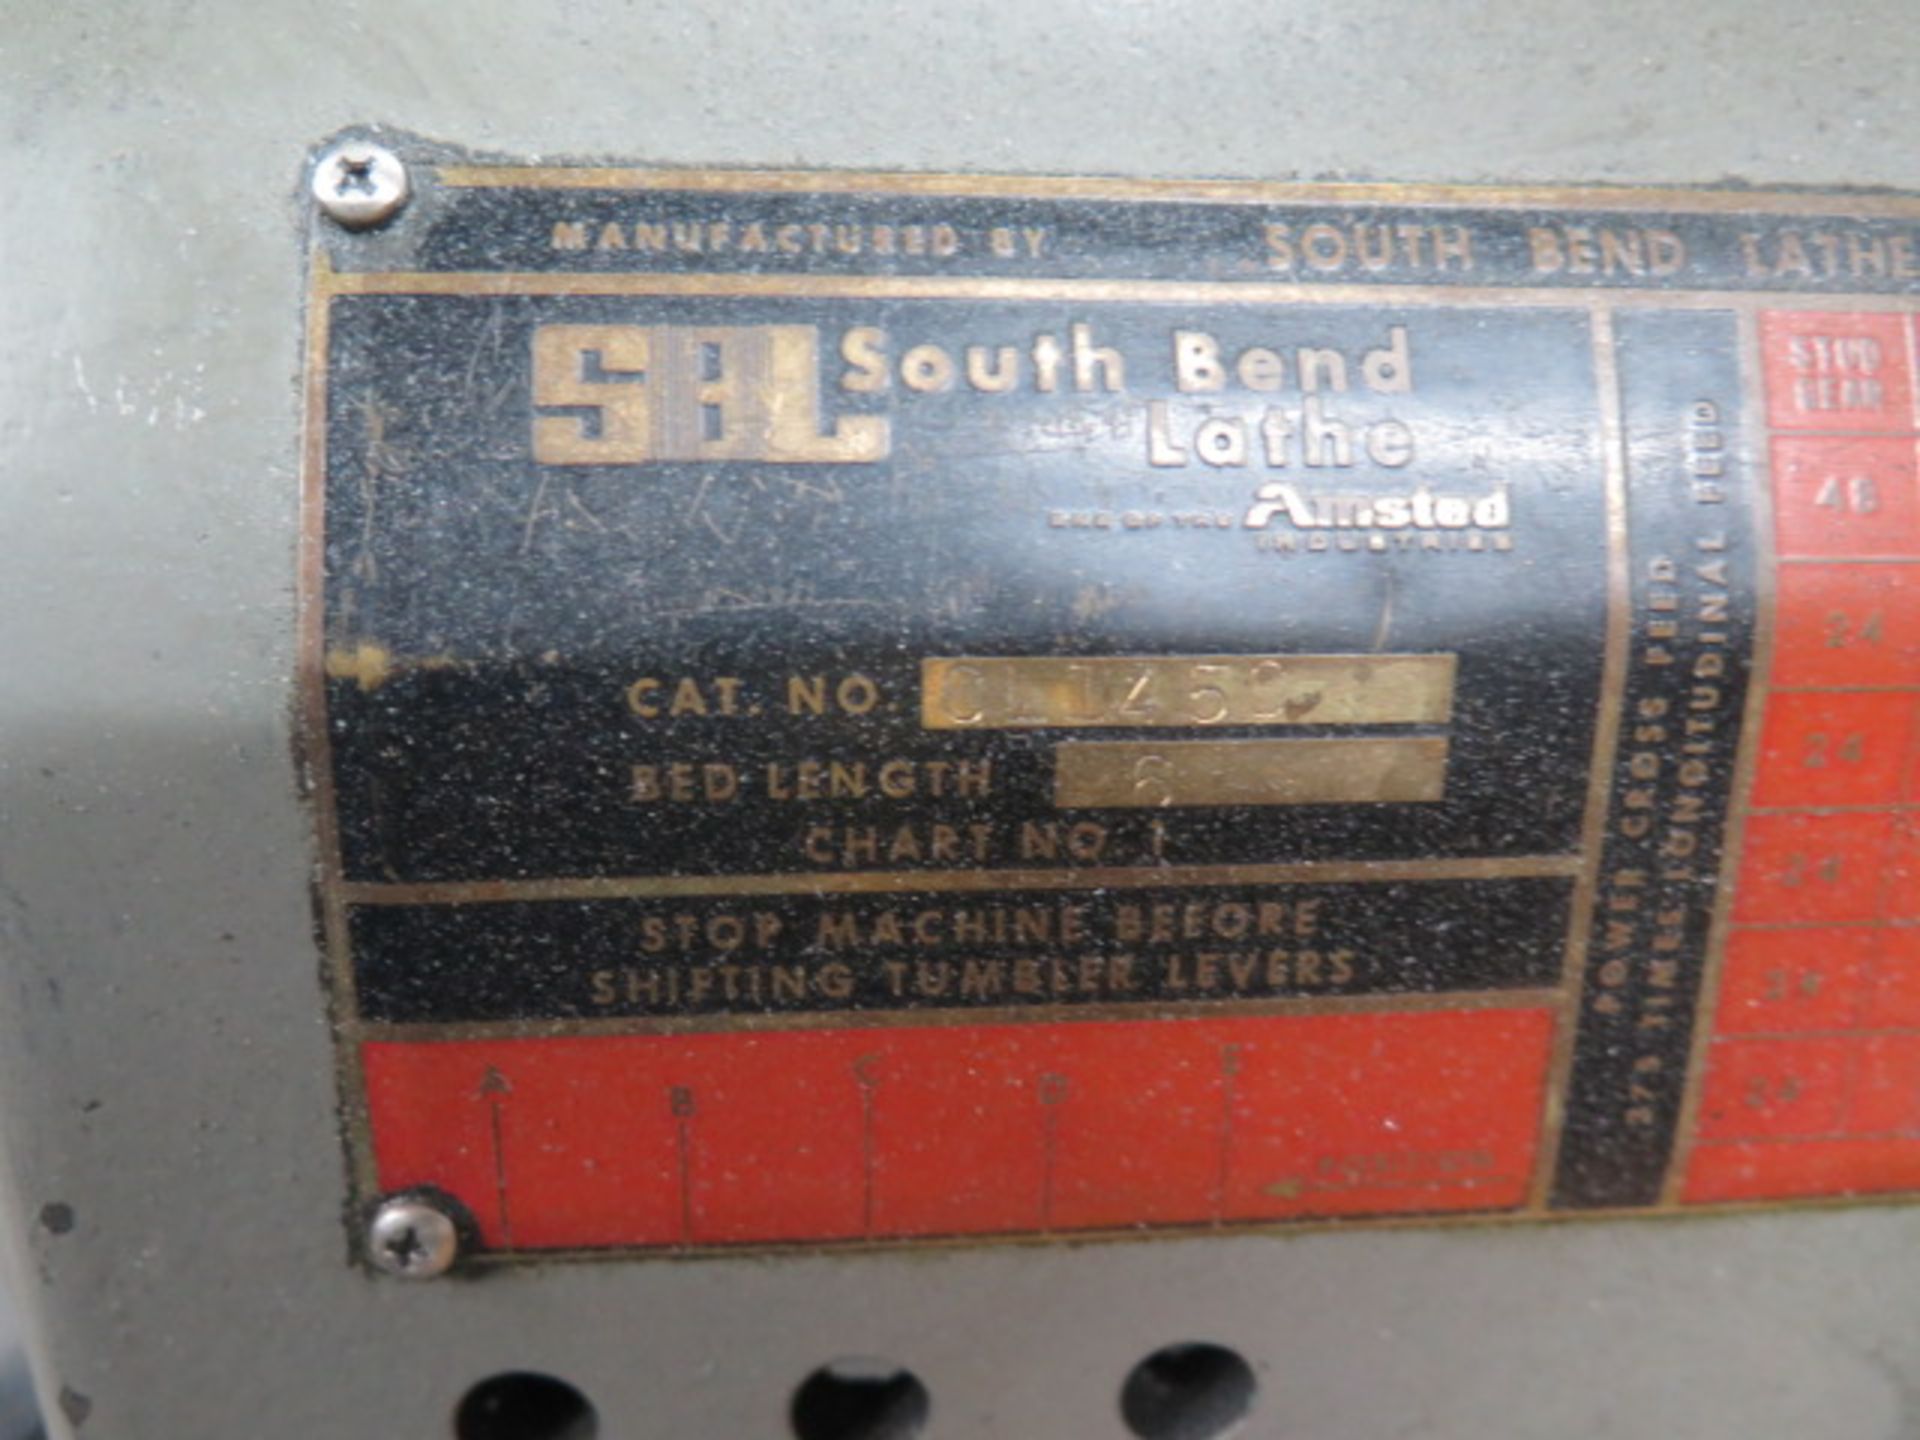 South Bend 13" x 42" Lathe s/n 15075T w/ 4-Speeds, Inch Threading, Tailstock, 5C Collet SOLD AS IS - Image 10 of 10